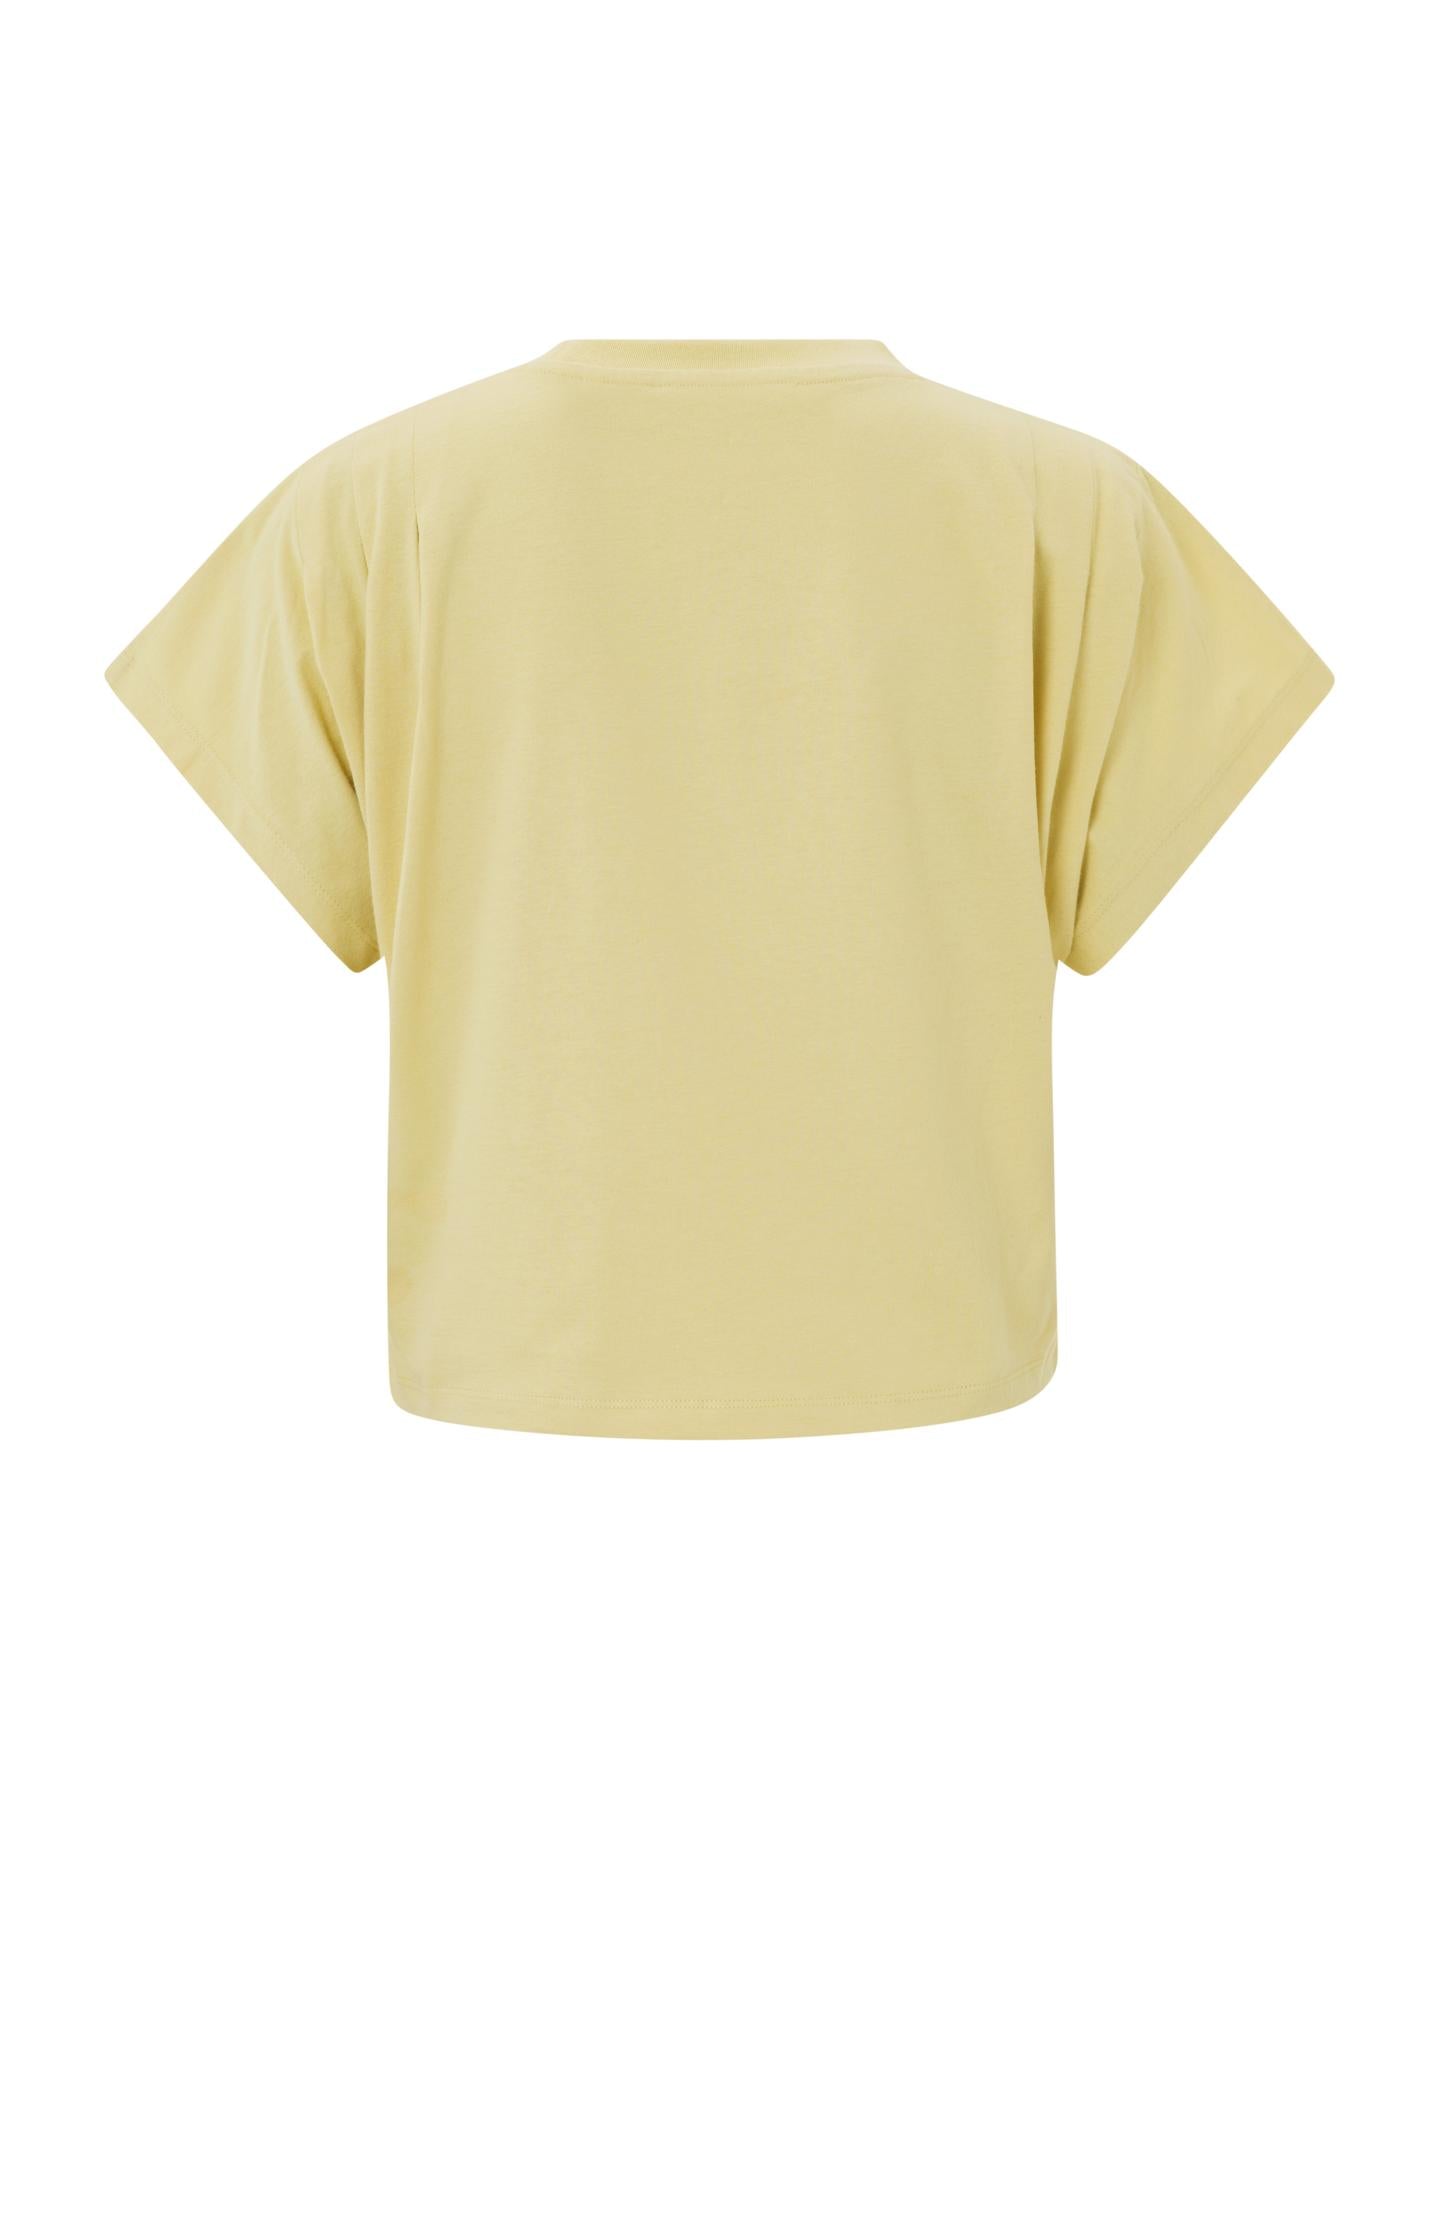 T-shirt with round neck, short sleeves and pleated details